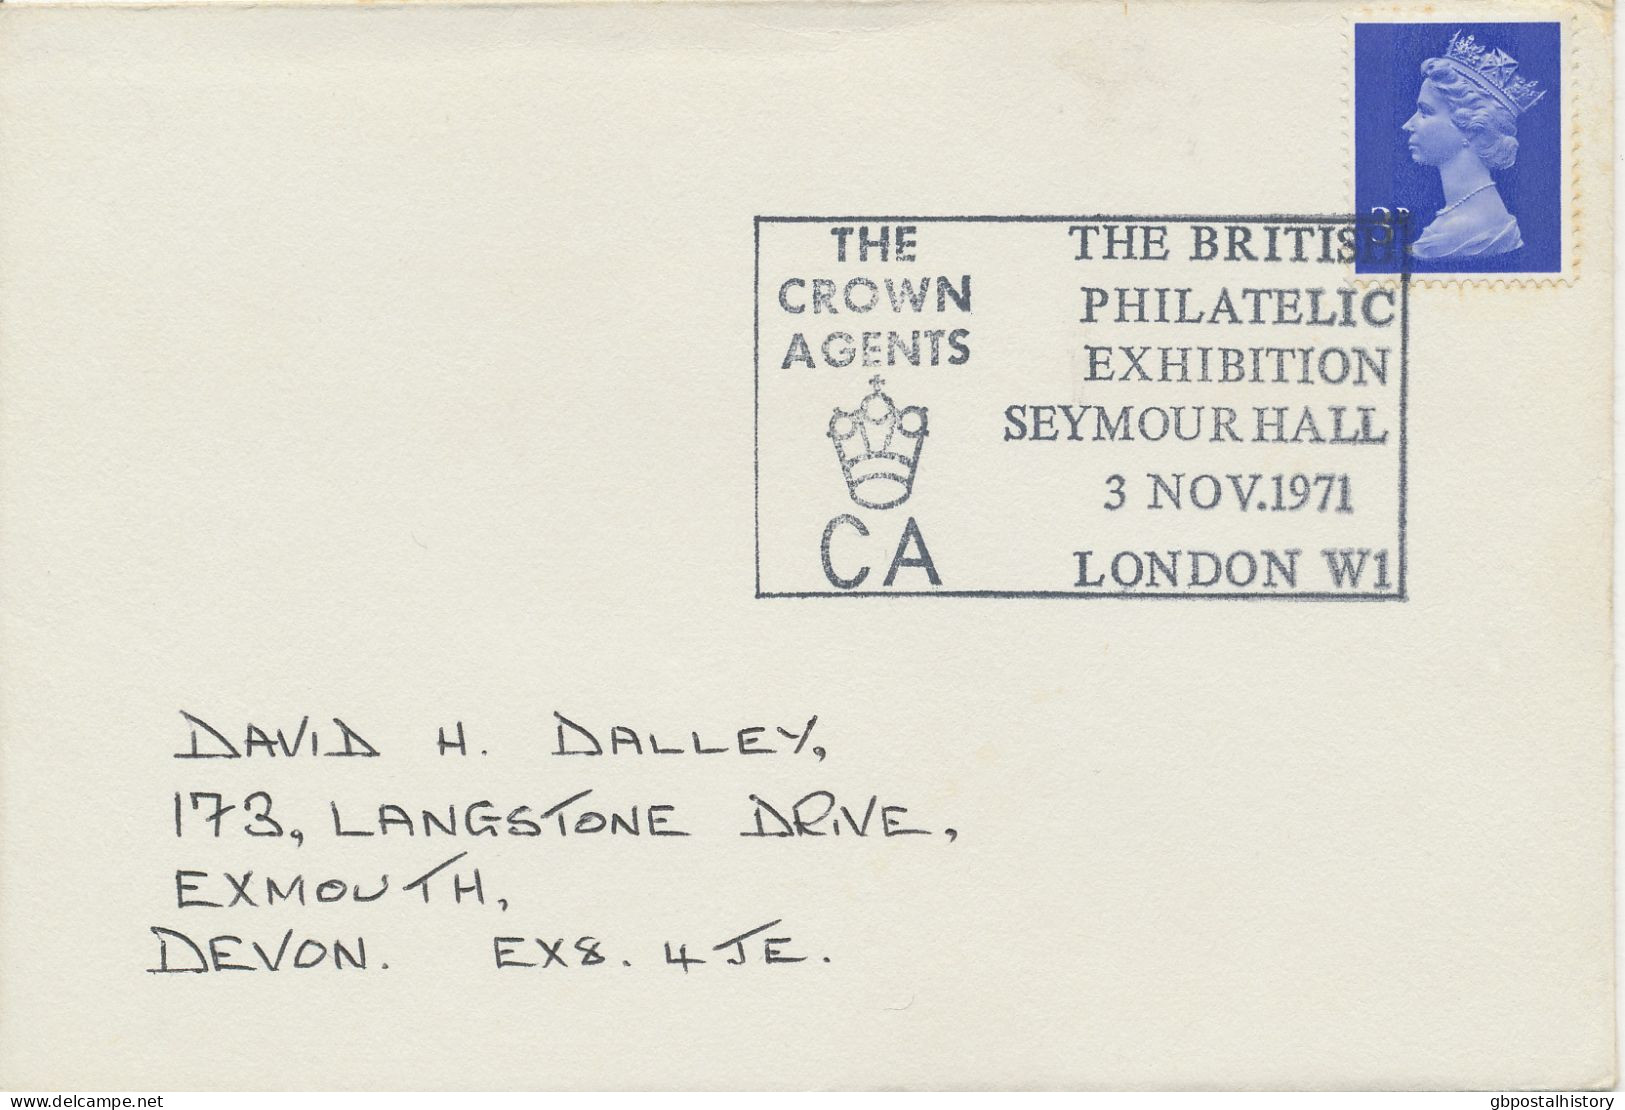 GB SPECIAL EVENT POSTMARKS 1971 THE BRITISH PHILATELIC EXHIBITION SEYMOUR HALL LONDON W.I. - THE CROWN AGENTS - Lettres & Documents